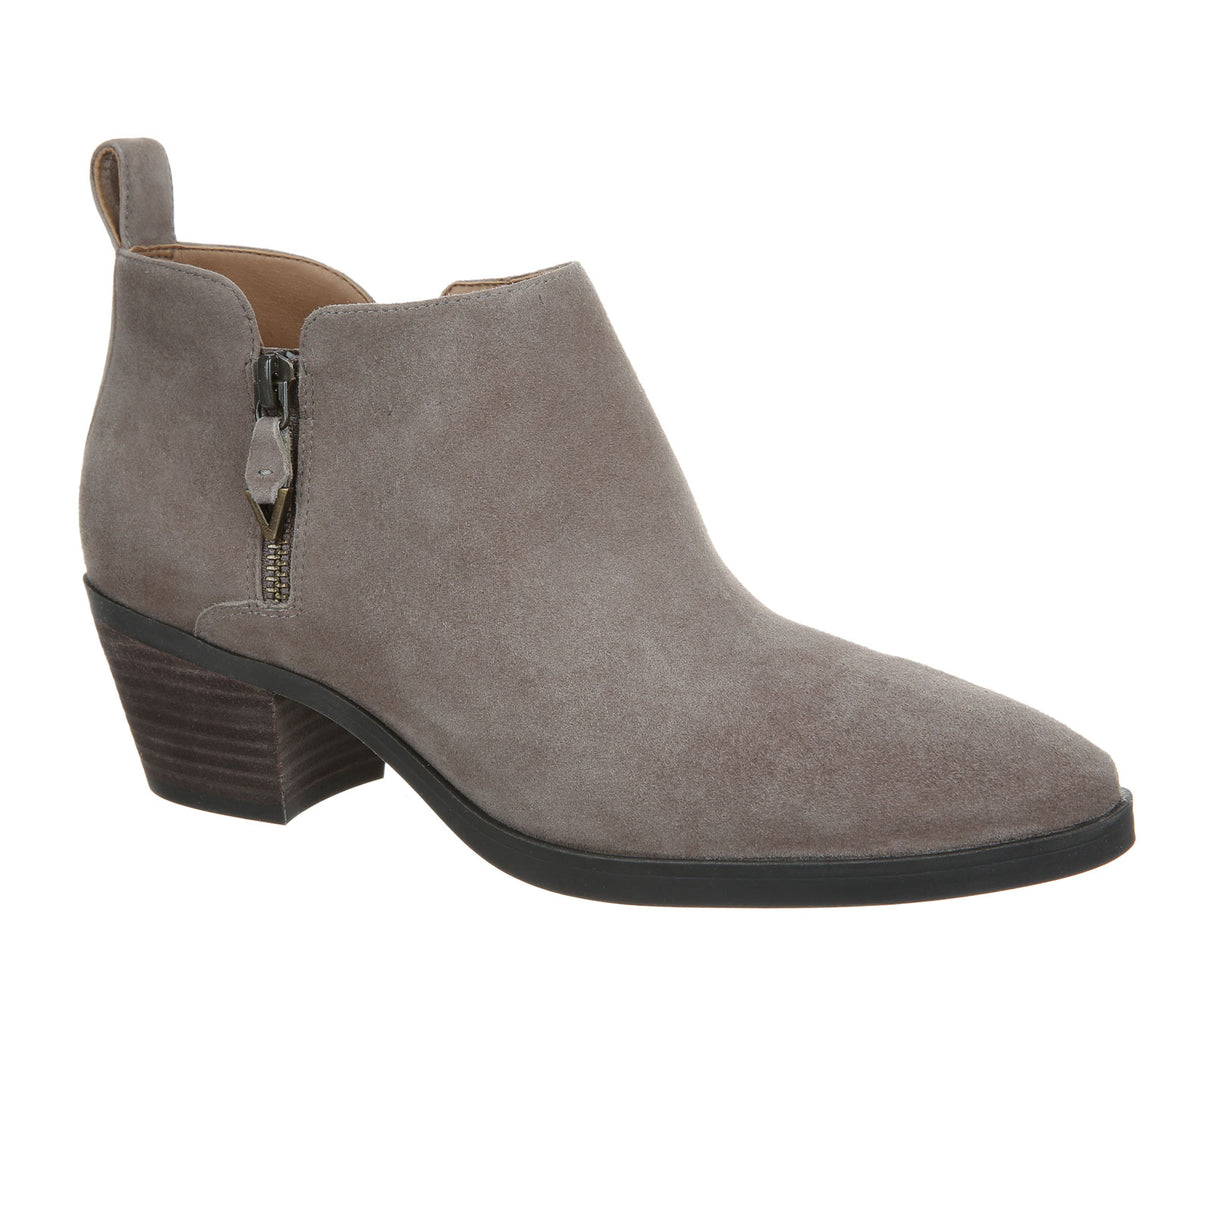 Vionic Cecily Ankle Boot (Women) - Stone Waterproof Suede Boots - Fashion - Ankle Boot - The Heel Shoe Fitters